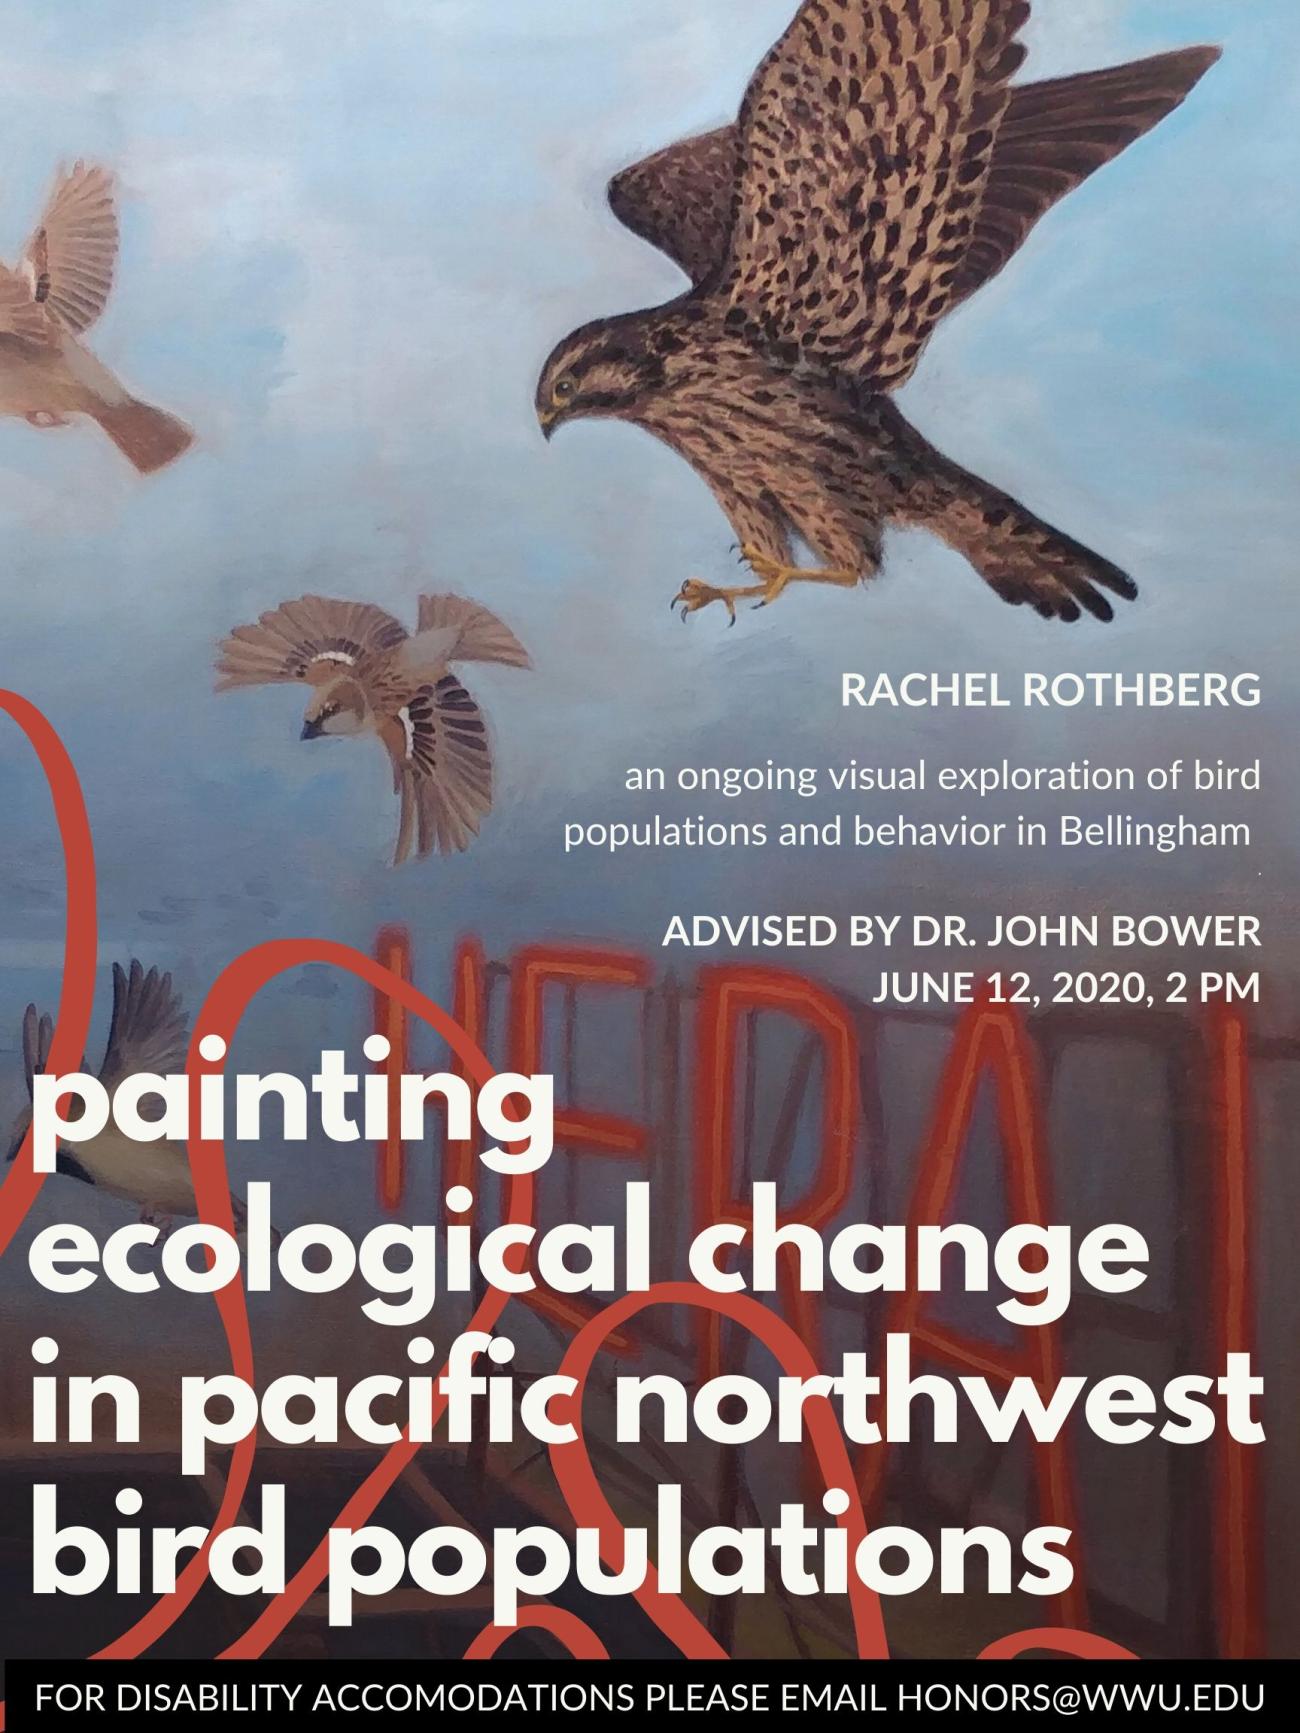 Image: Painting of a Merlin Falcon hunting House Sparrows above the Herald Building in Downtown Bellingham.  Text reads: "Painting Ecological Change in Pacific Northwest Bird Populations."  "Rachel Rothberg. An ongoing visual exploration of bird populations and behavior in Bellingham. Advised by Dr. John Bower. June 12, 2020, 2 PM."  "For disability accommodations please email honors@wwu.edu."